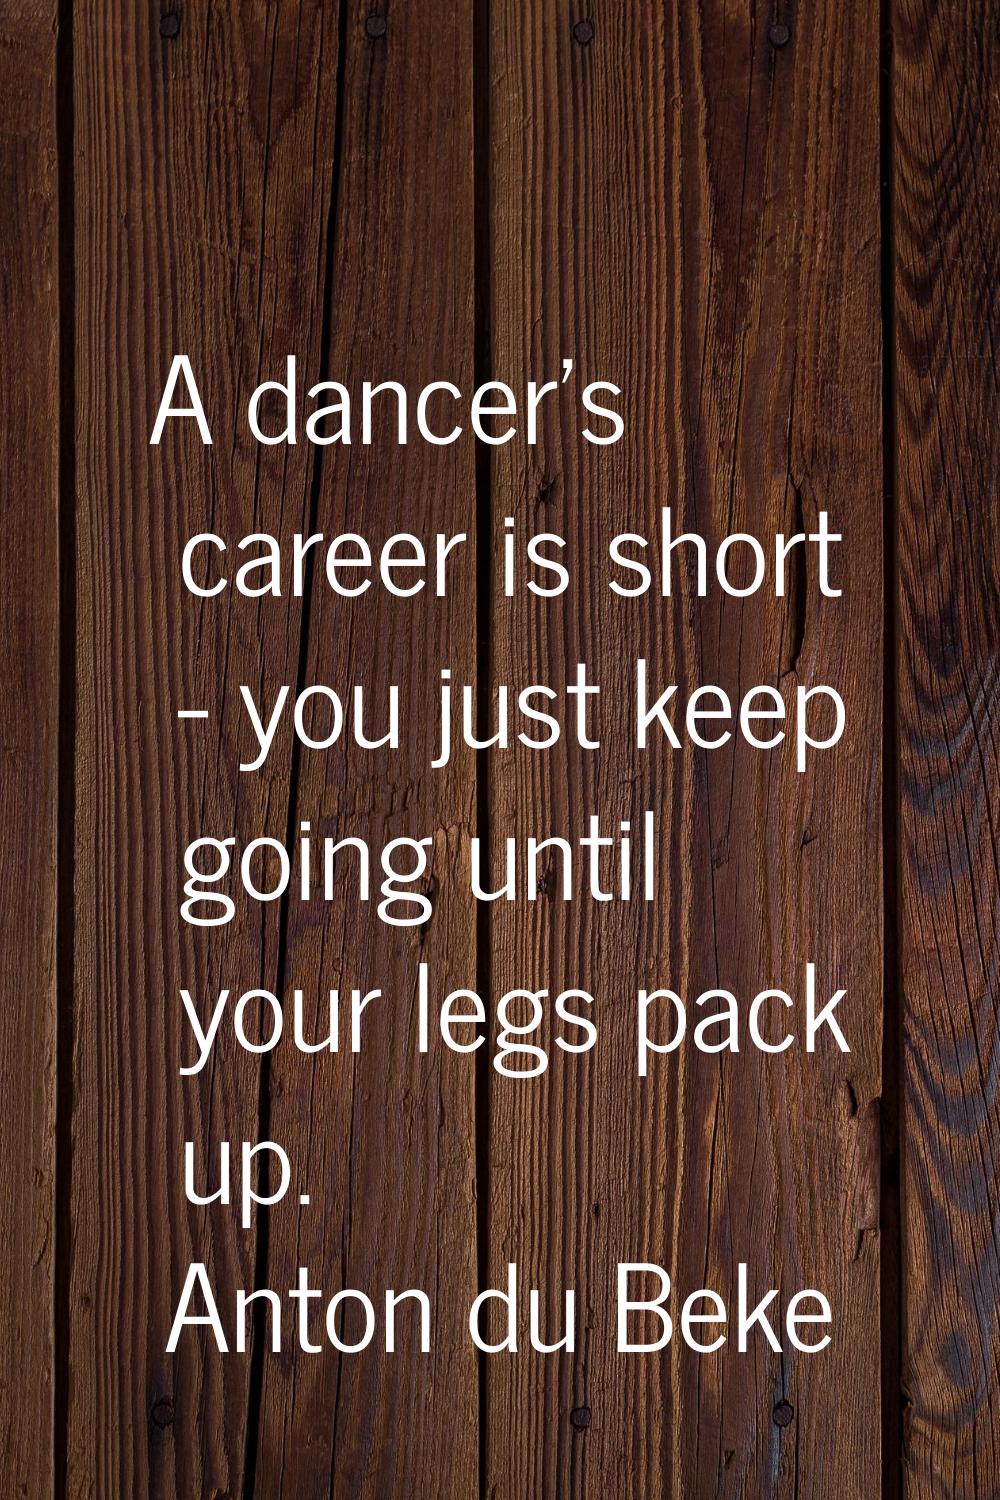 A dancer's career is short - you just keep going until your legs pack up.